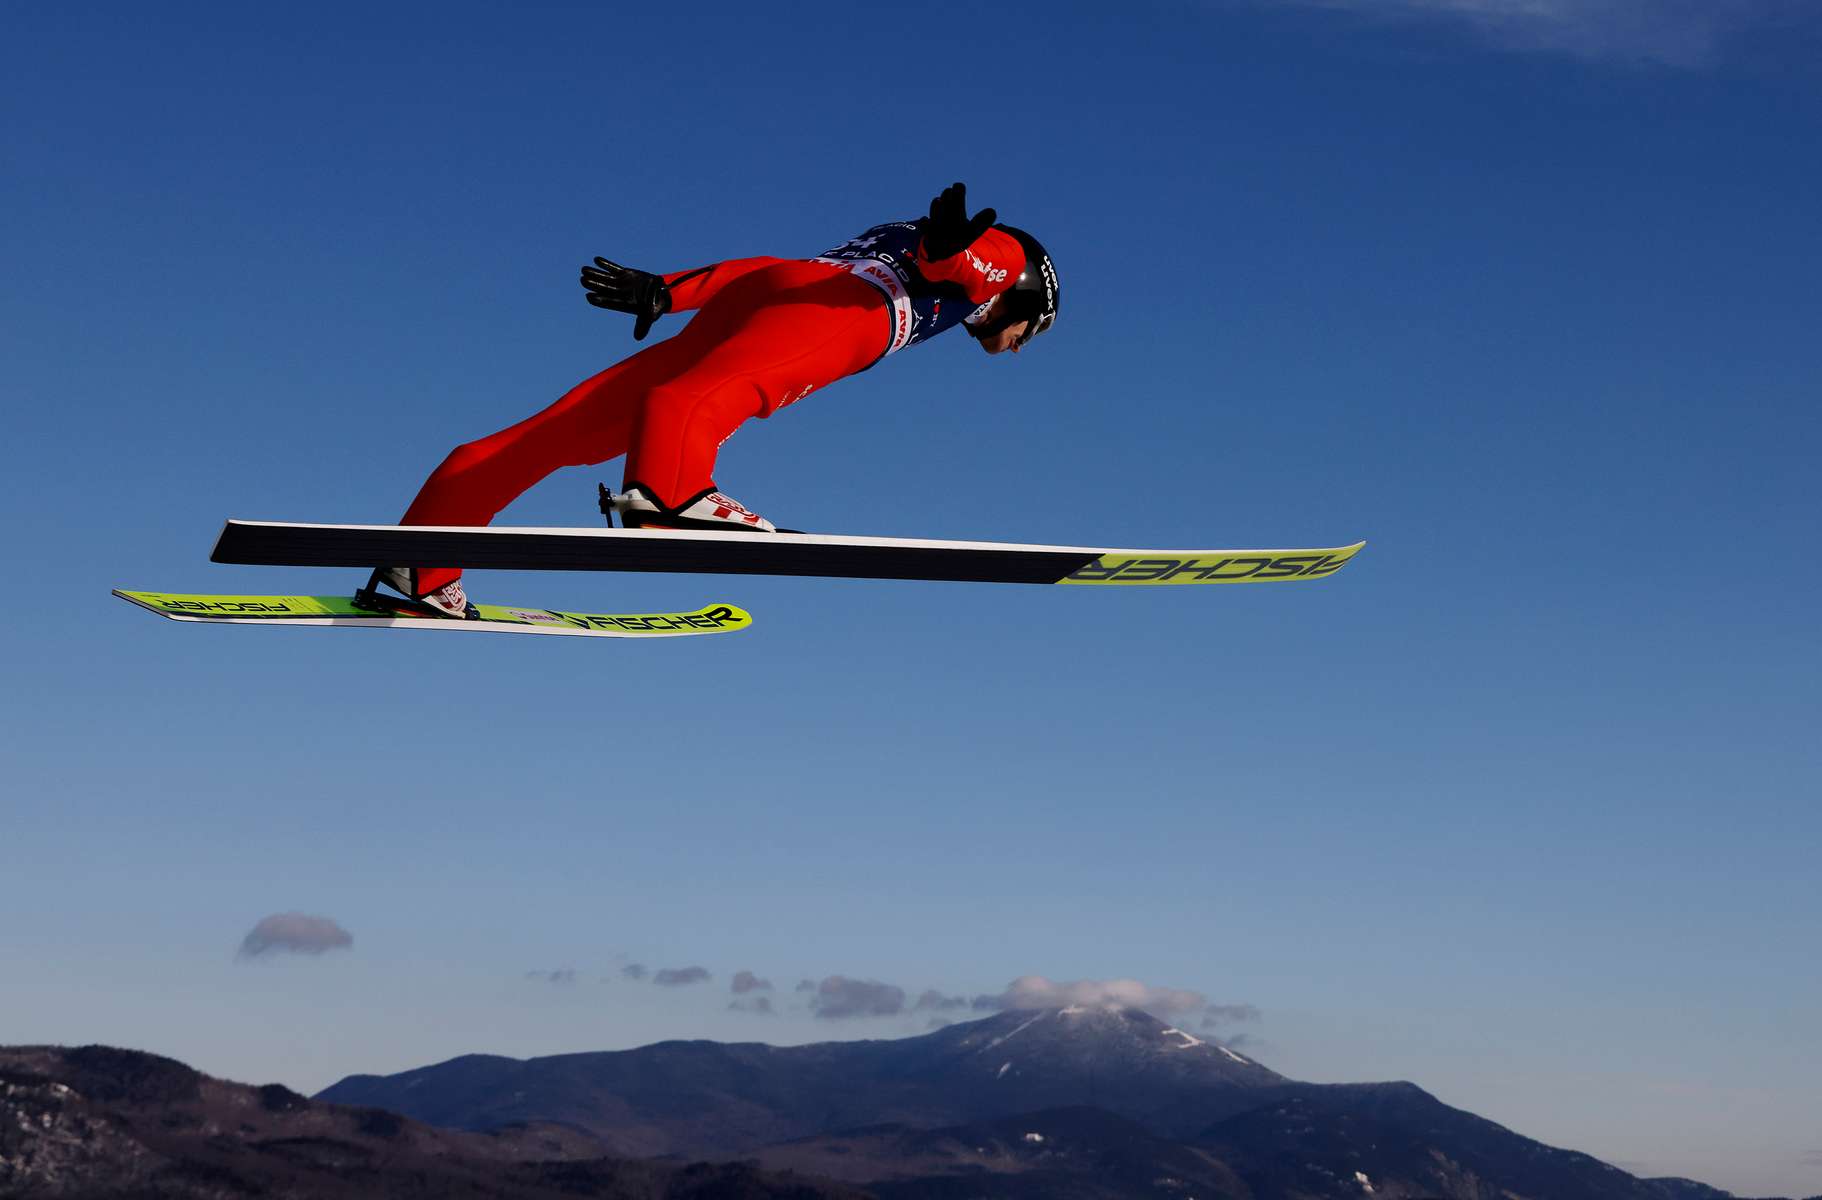 Gregor Deschwanden of Switzerland jumps during the Men's Large Hill competition on Day 3 of the Viessmann FIS Ski Jumping World Cup at Lake Placid Olympic Jumping Complex on February 12, 2023 in Lake Placid, New York. 